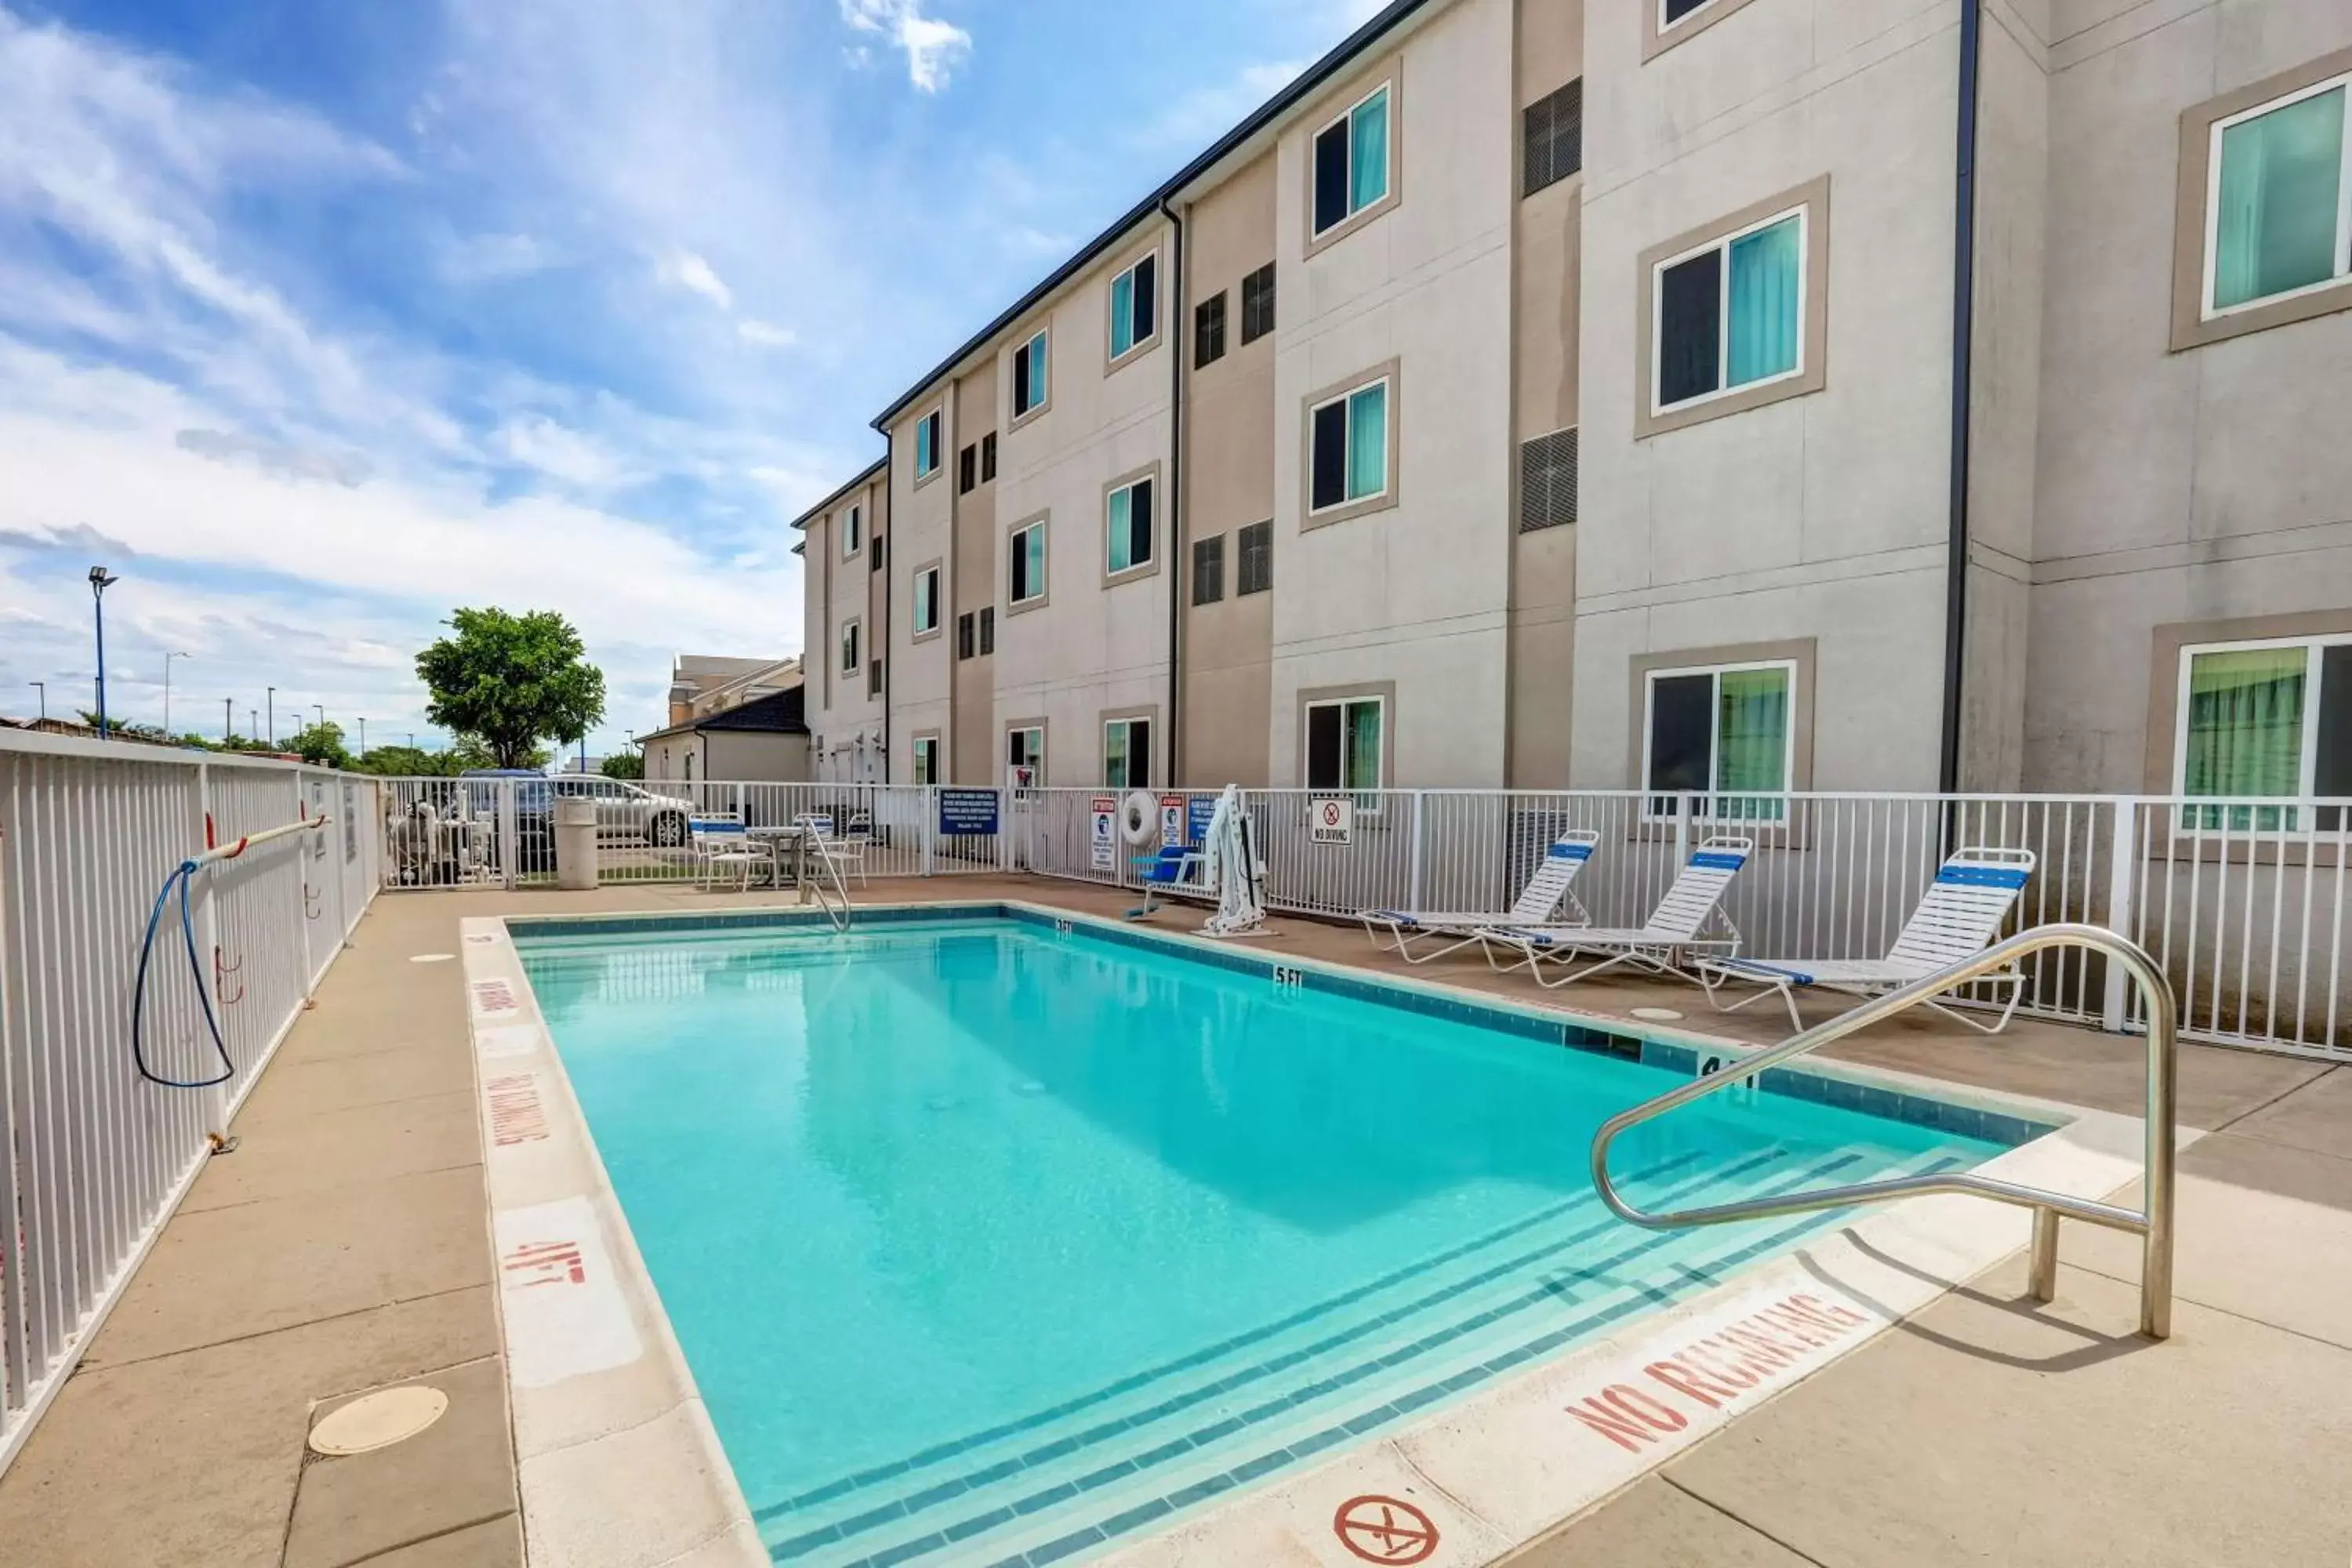 Activities, Swimming Pool in Motel 6-Weatherford, TX